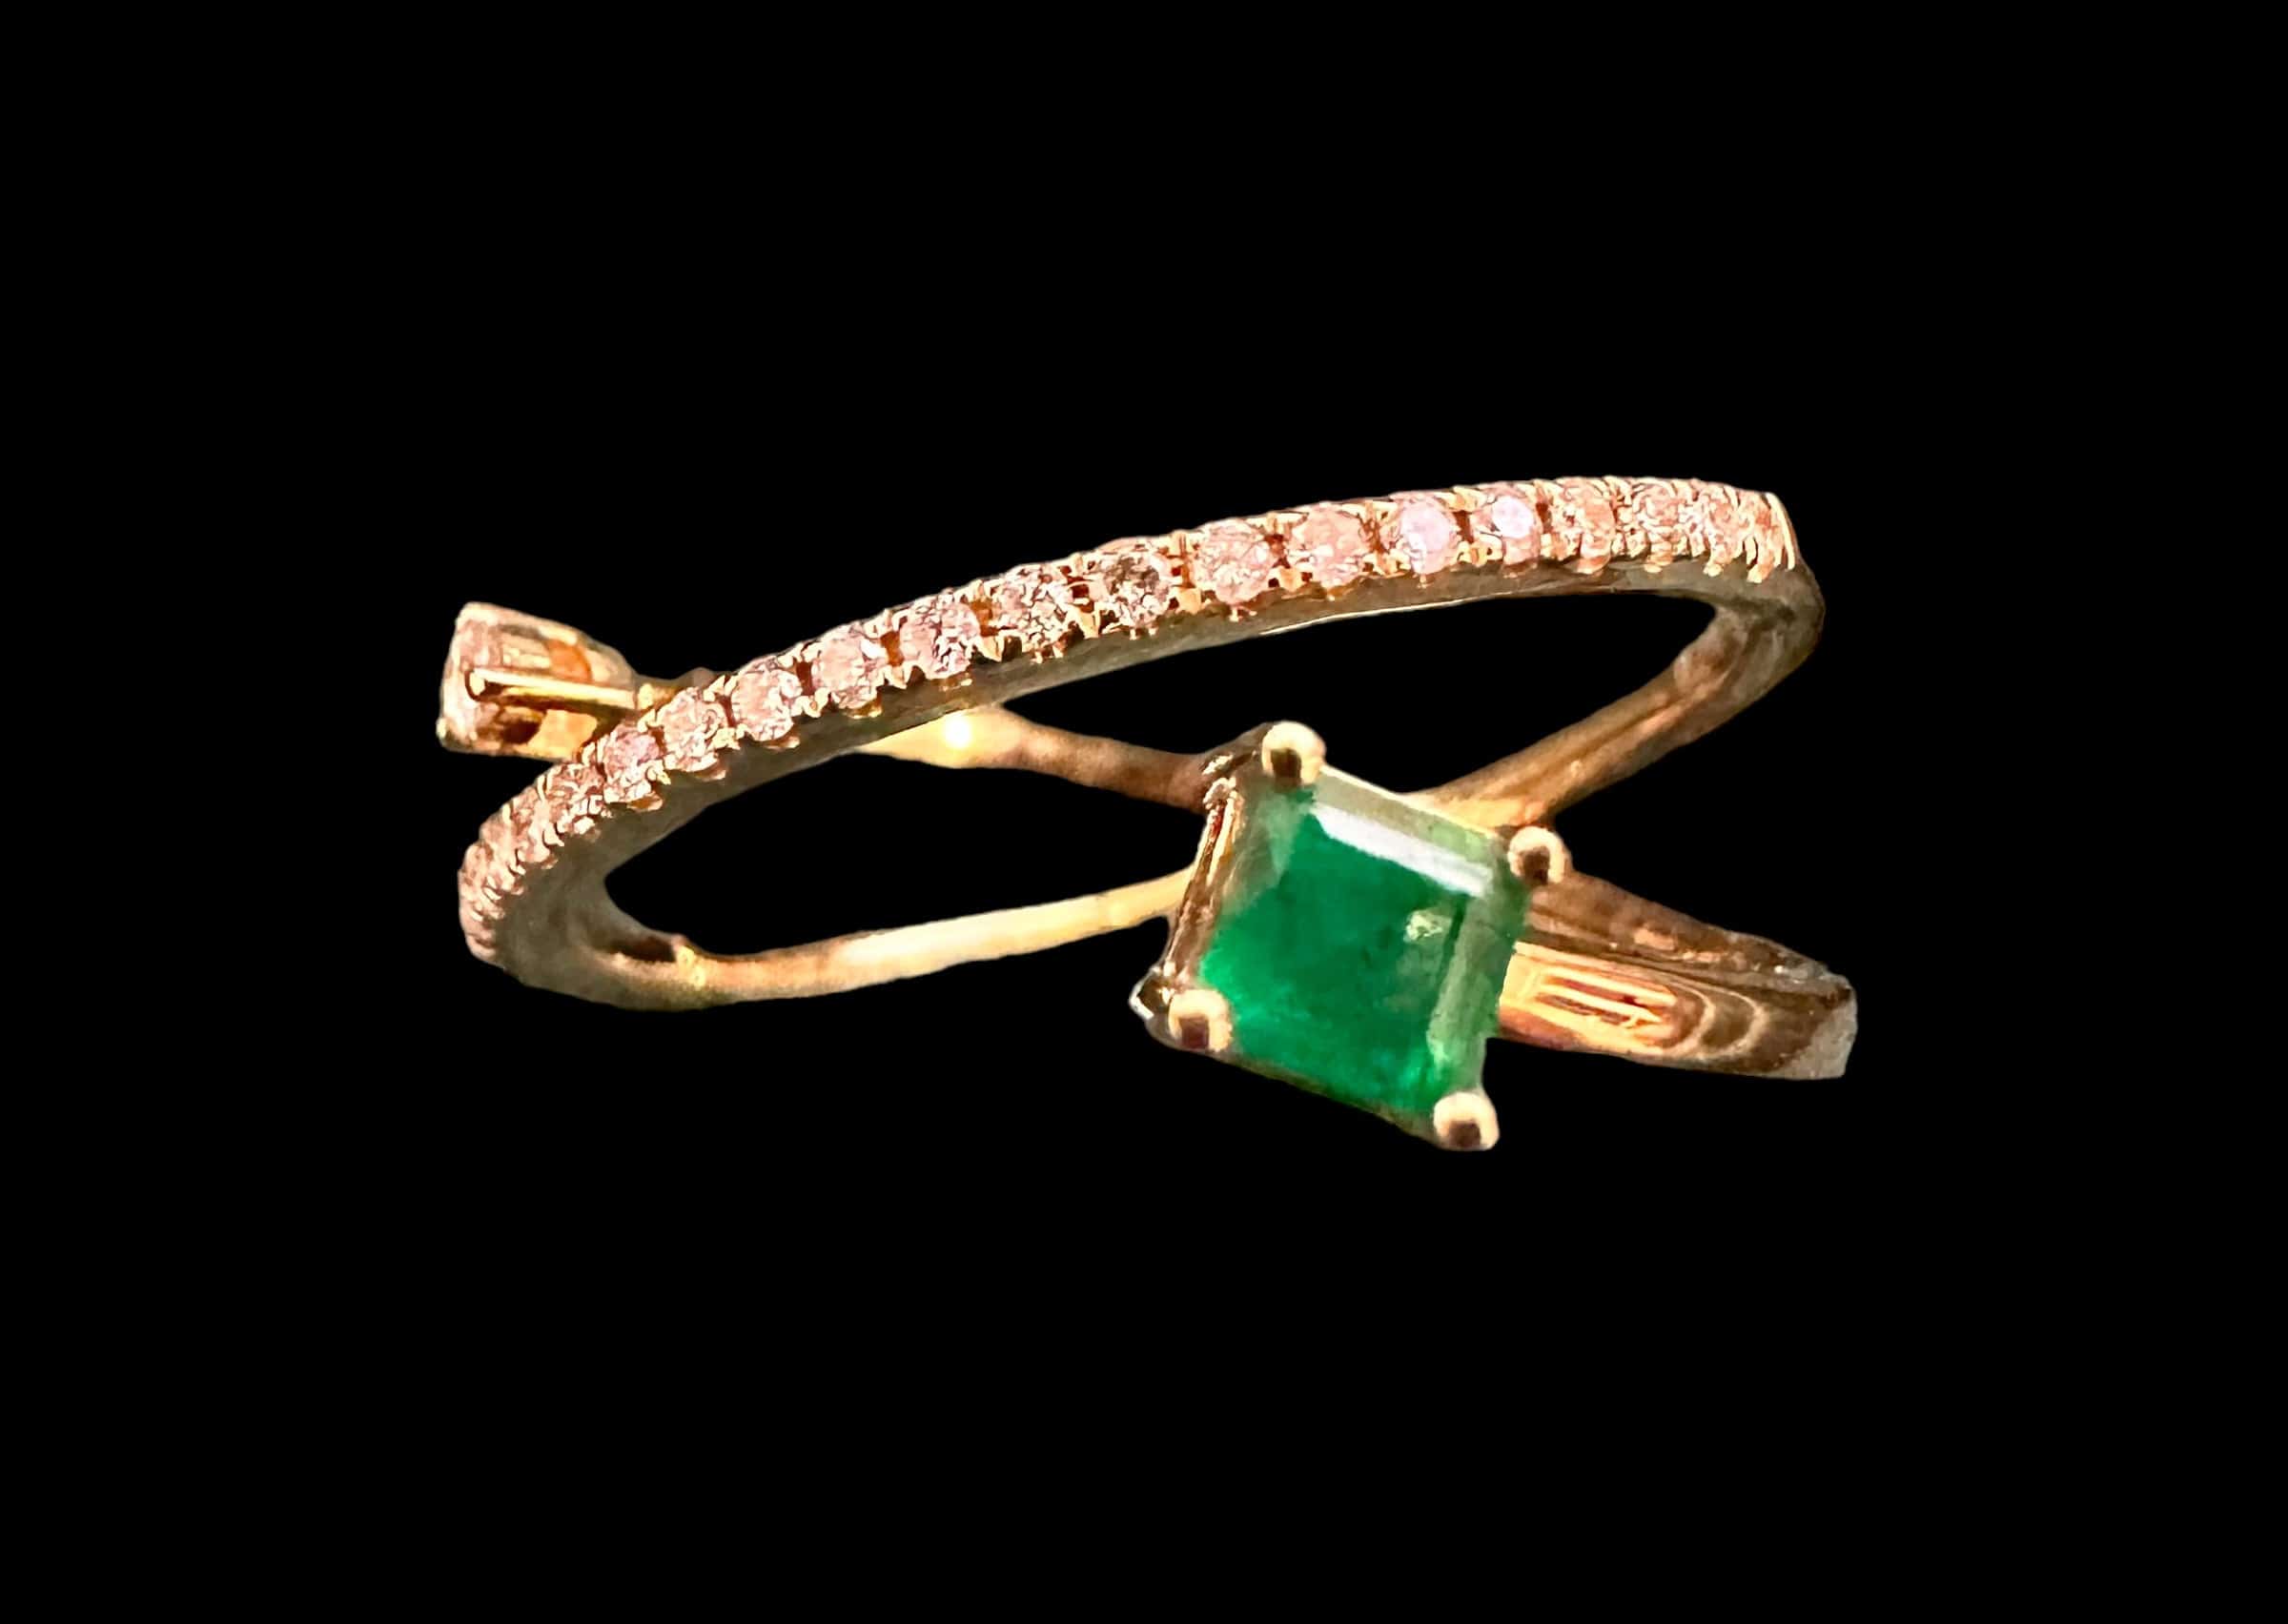 Luxury Promise Square Cut Emerald & Diamond Ring set in 18K Yellow Gold